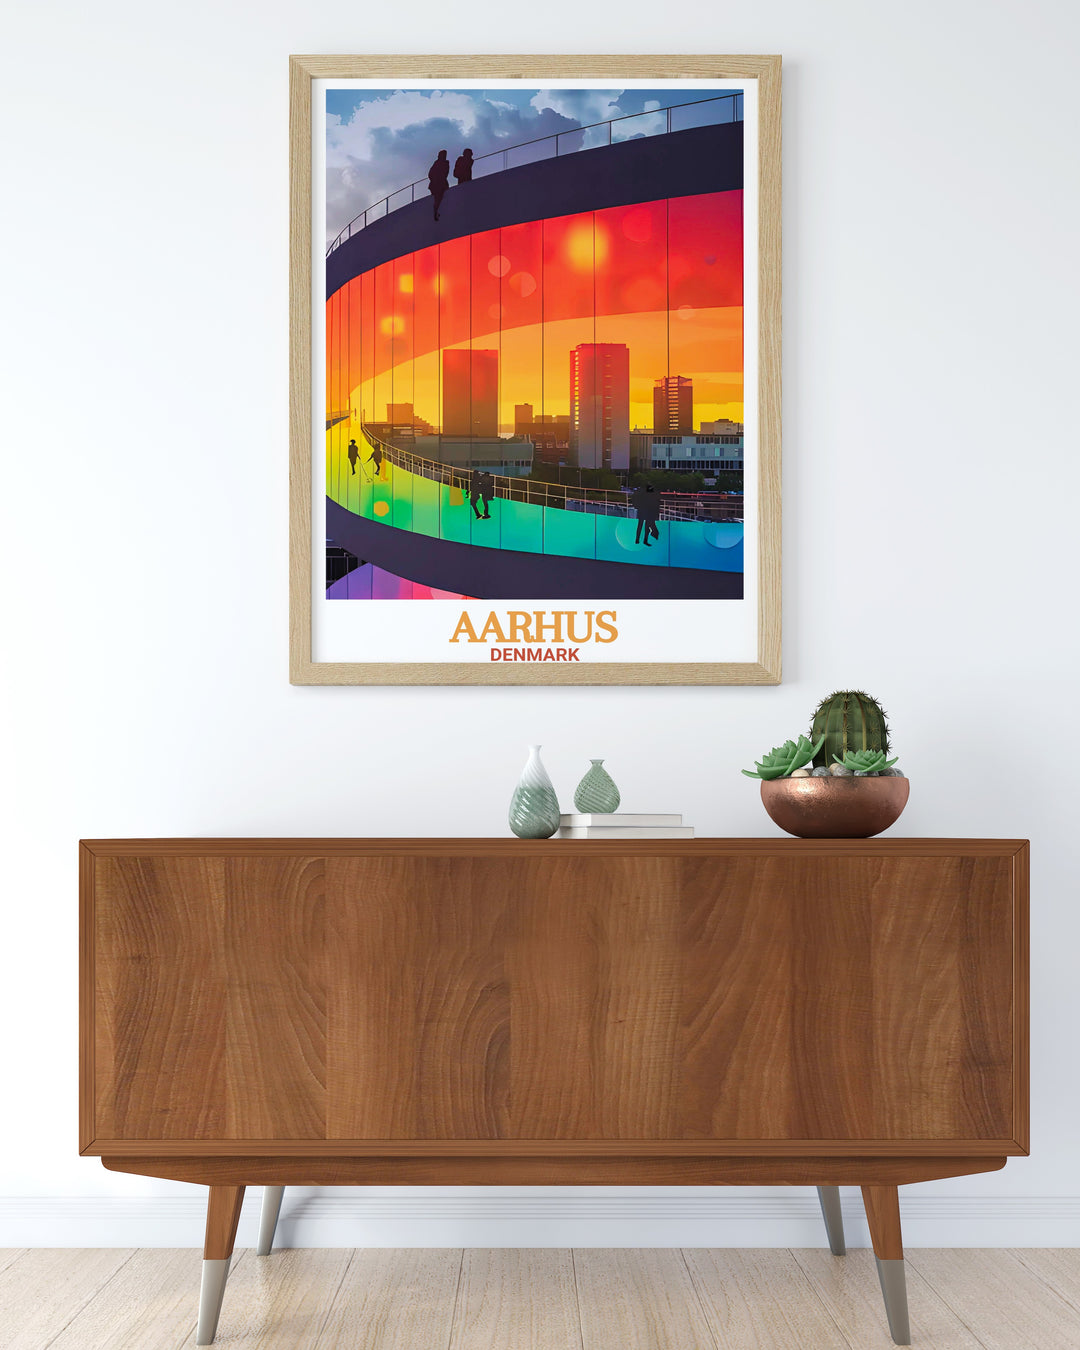 Discover the beauty of Aarhus with ARoS Aarhus Art Museum posters that highlight the museums grandeur and captivating exhibits. These prints are perfect for enhancing your home or office with a touch of Denmarks artistic charm.